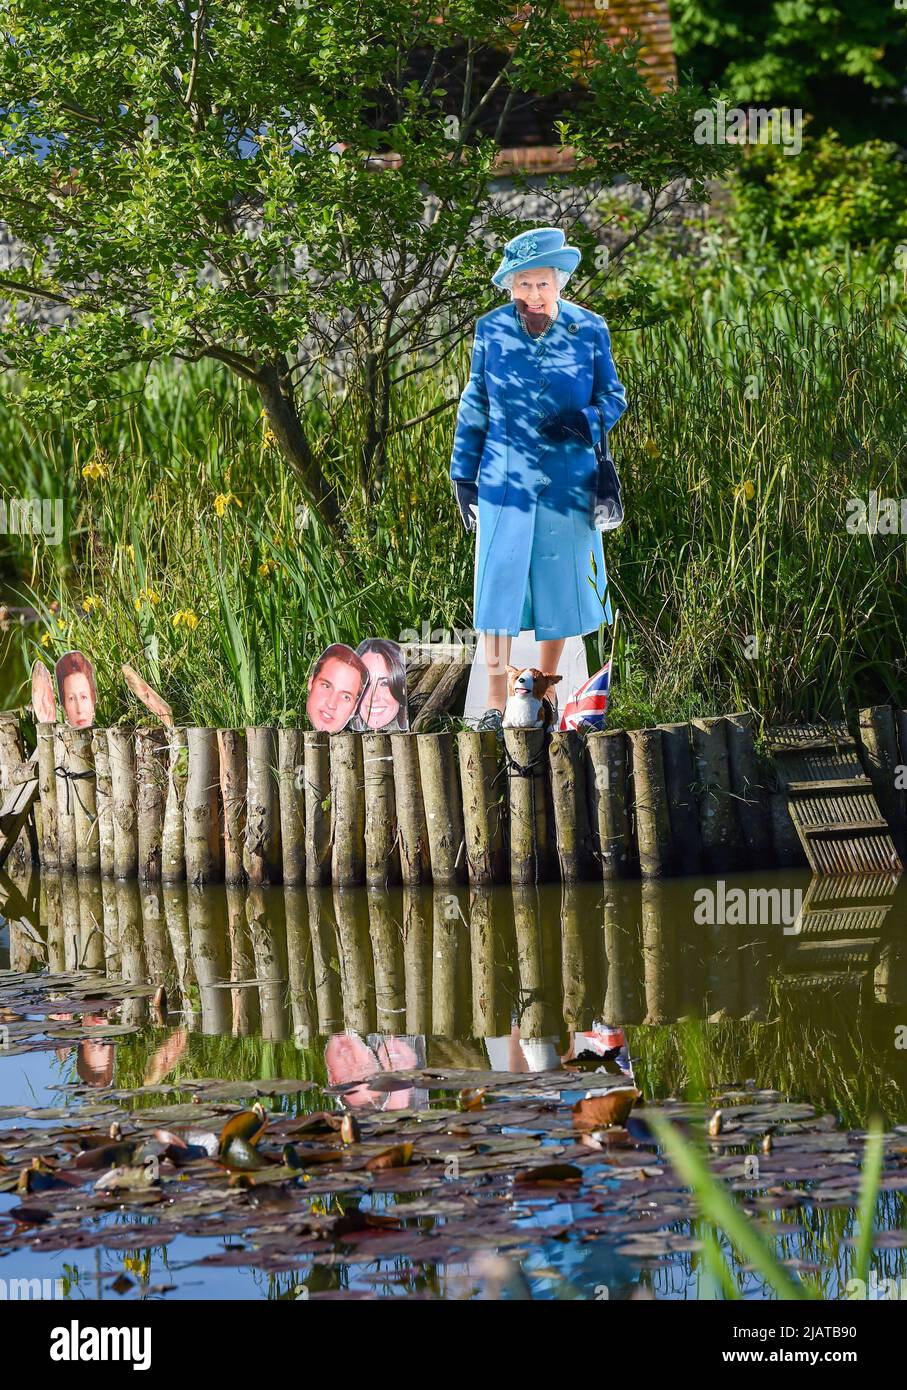 Brighton UK 1st June 2022 - Cardboard cutouts of The Queen and members of the Royal family have appeared on the duck pond in Rottingdean village near Brighton as they prepare for the Queen's Platinum Jubilee Celebrations over the next few days : Credit Simon Dack / Alamy Live News Stock Photo